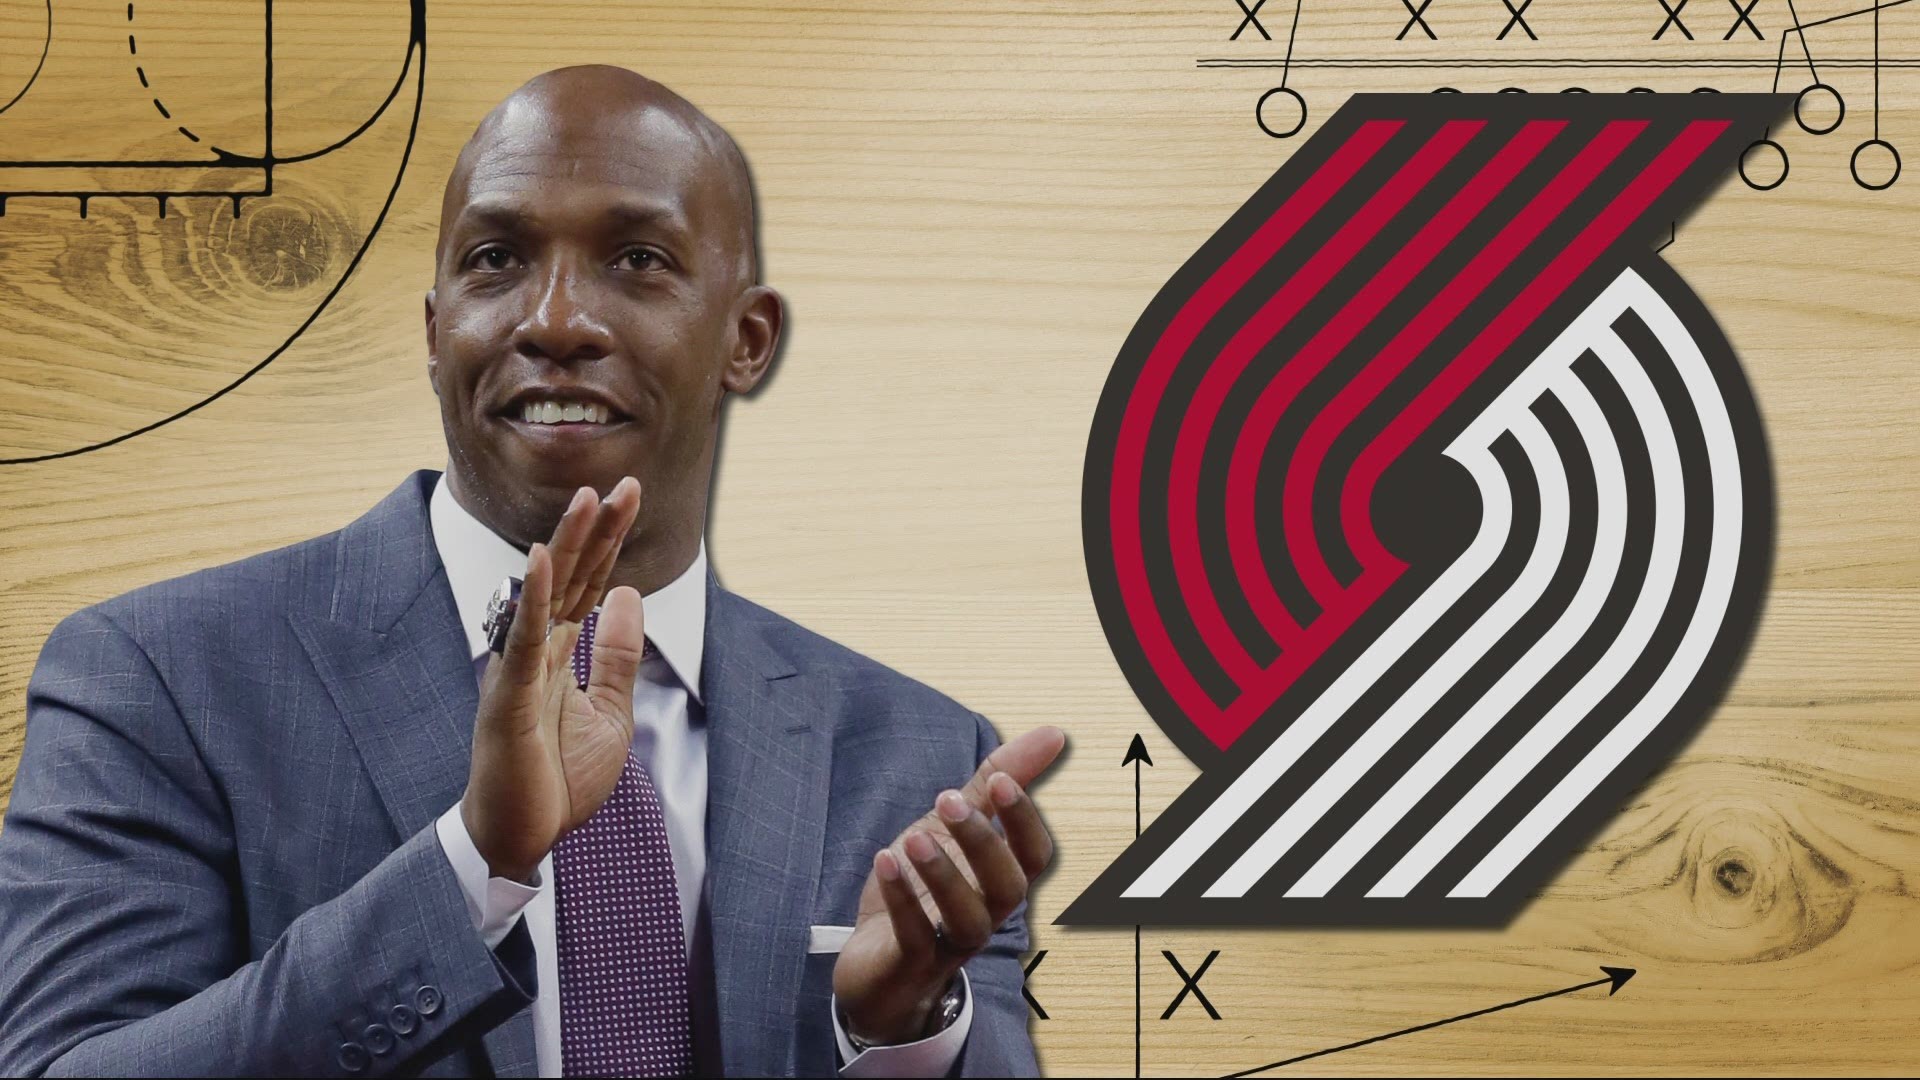 The Trail Blazers have a new coach, Chauncey Billups, but the hiring is coming with some harsh criticism stemming from Billups' past.